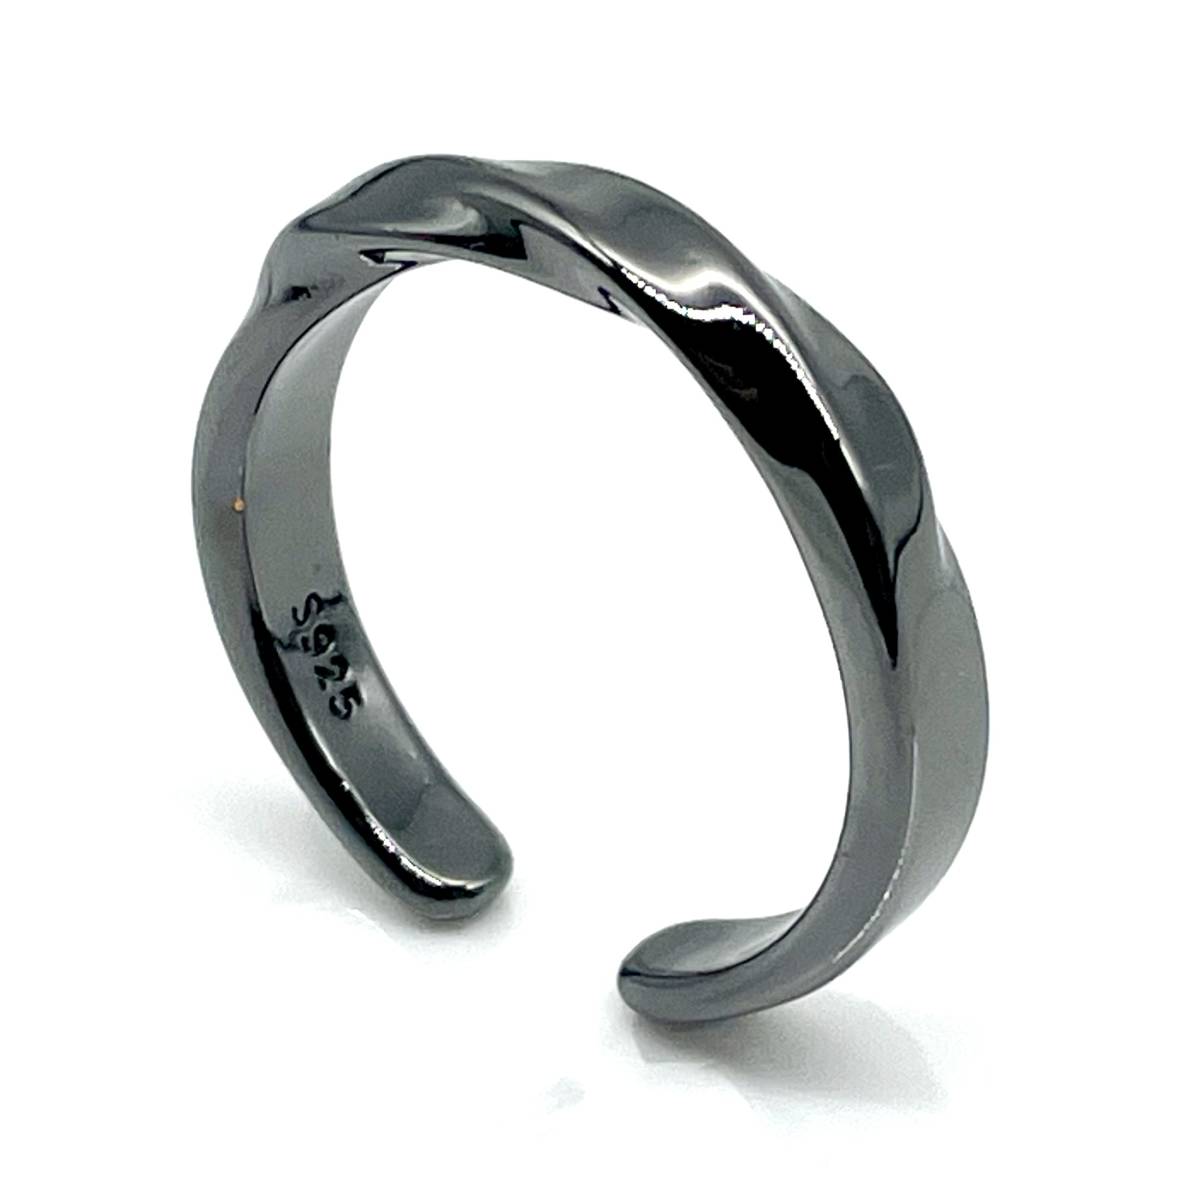  twist design silver ring * ring men's silver 925 16 number ring new goods unused open ring simple casual [PN327-1]